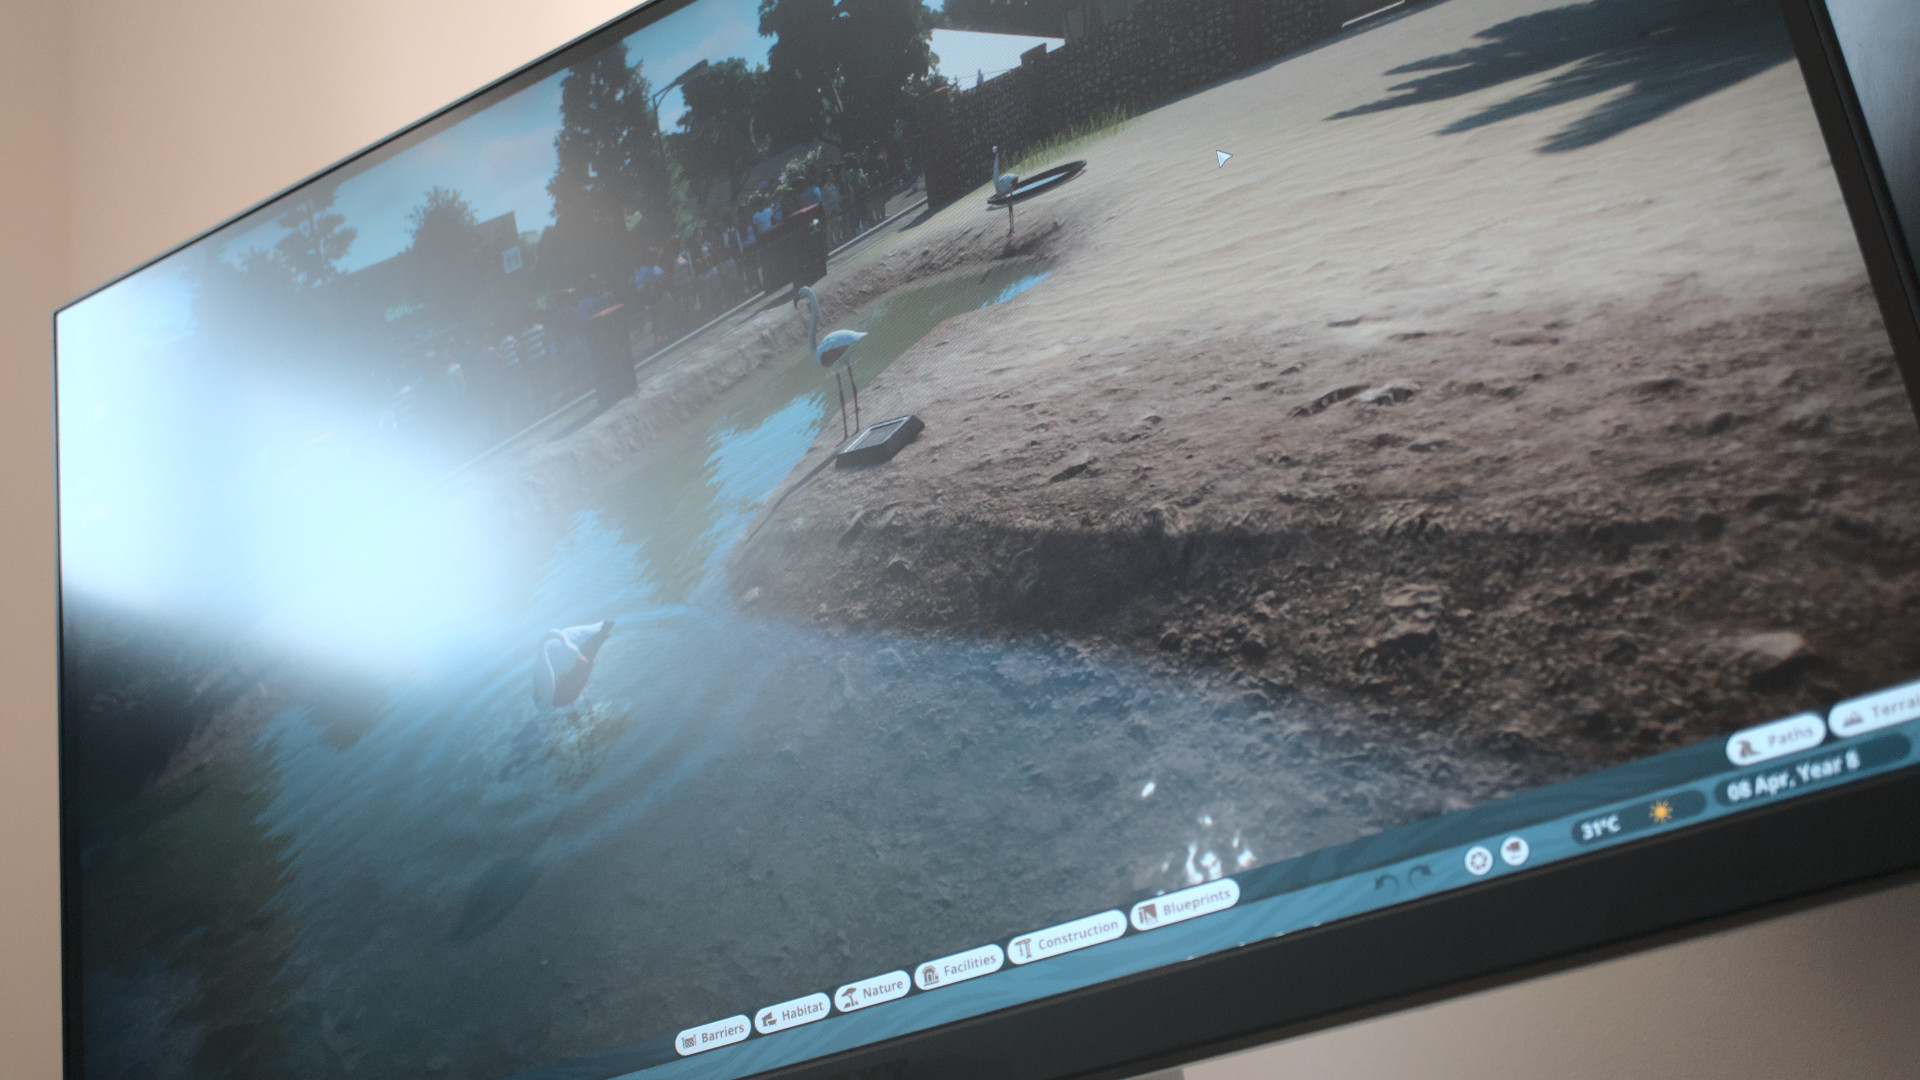 NZXT Canvas 27Q review: A stunning monitor debut